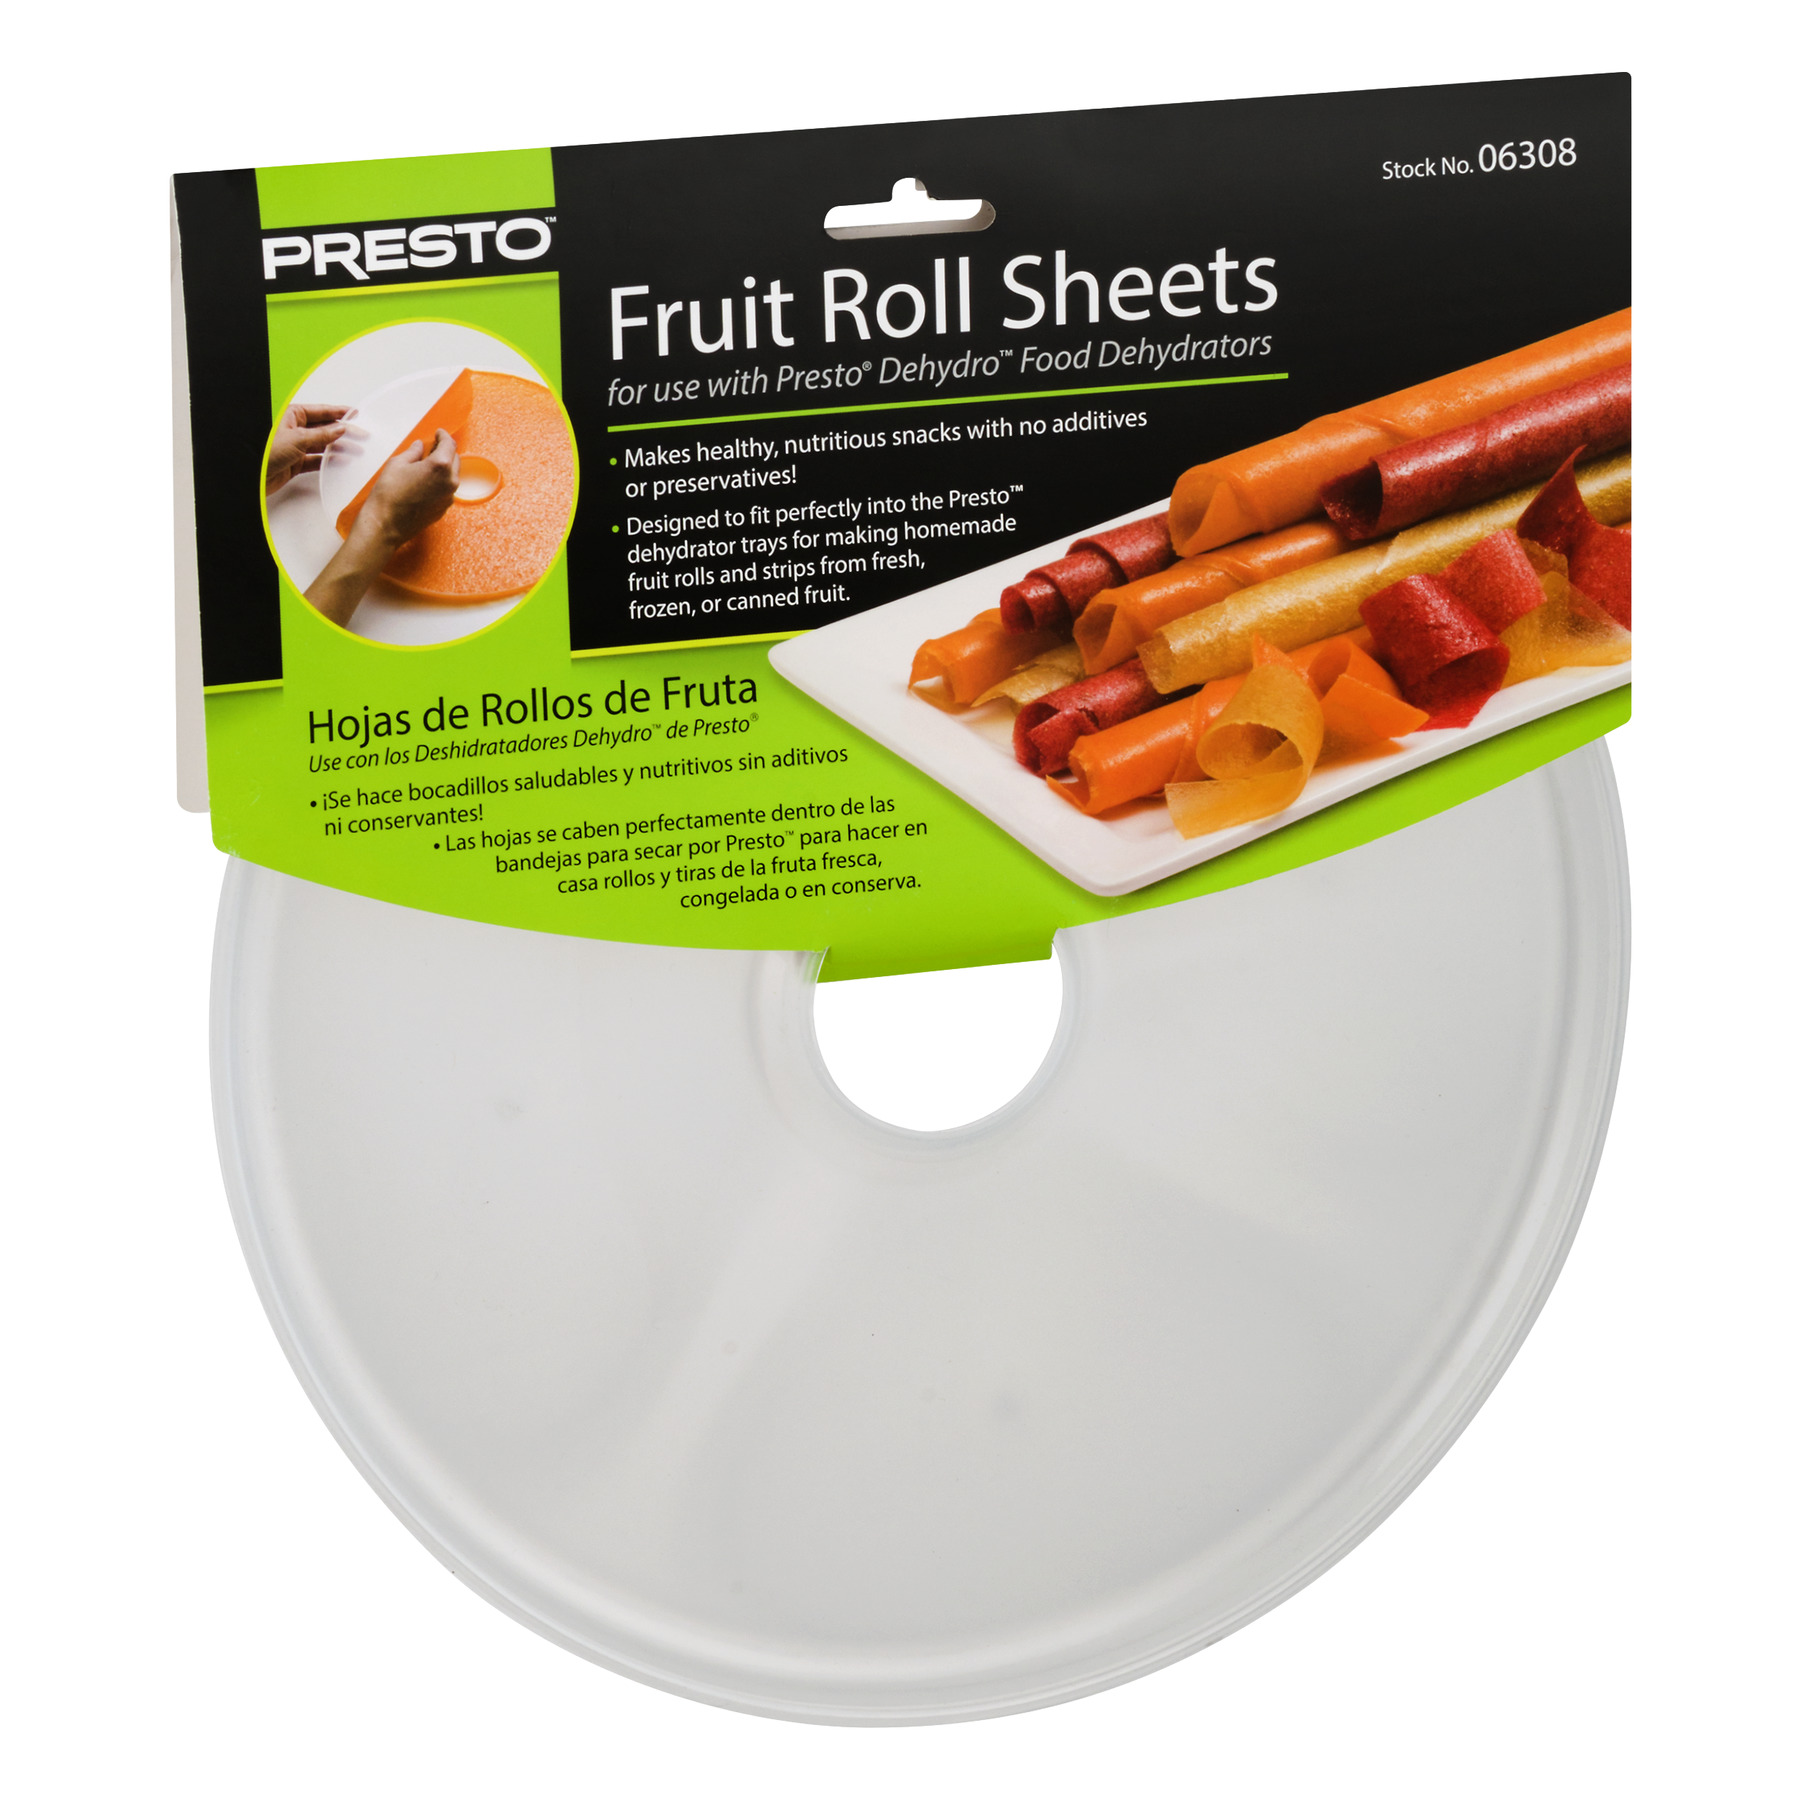 Presto Fruit Rolls Sheets, 2 Count - image 2 of 6